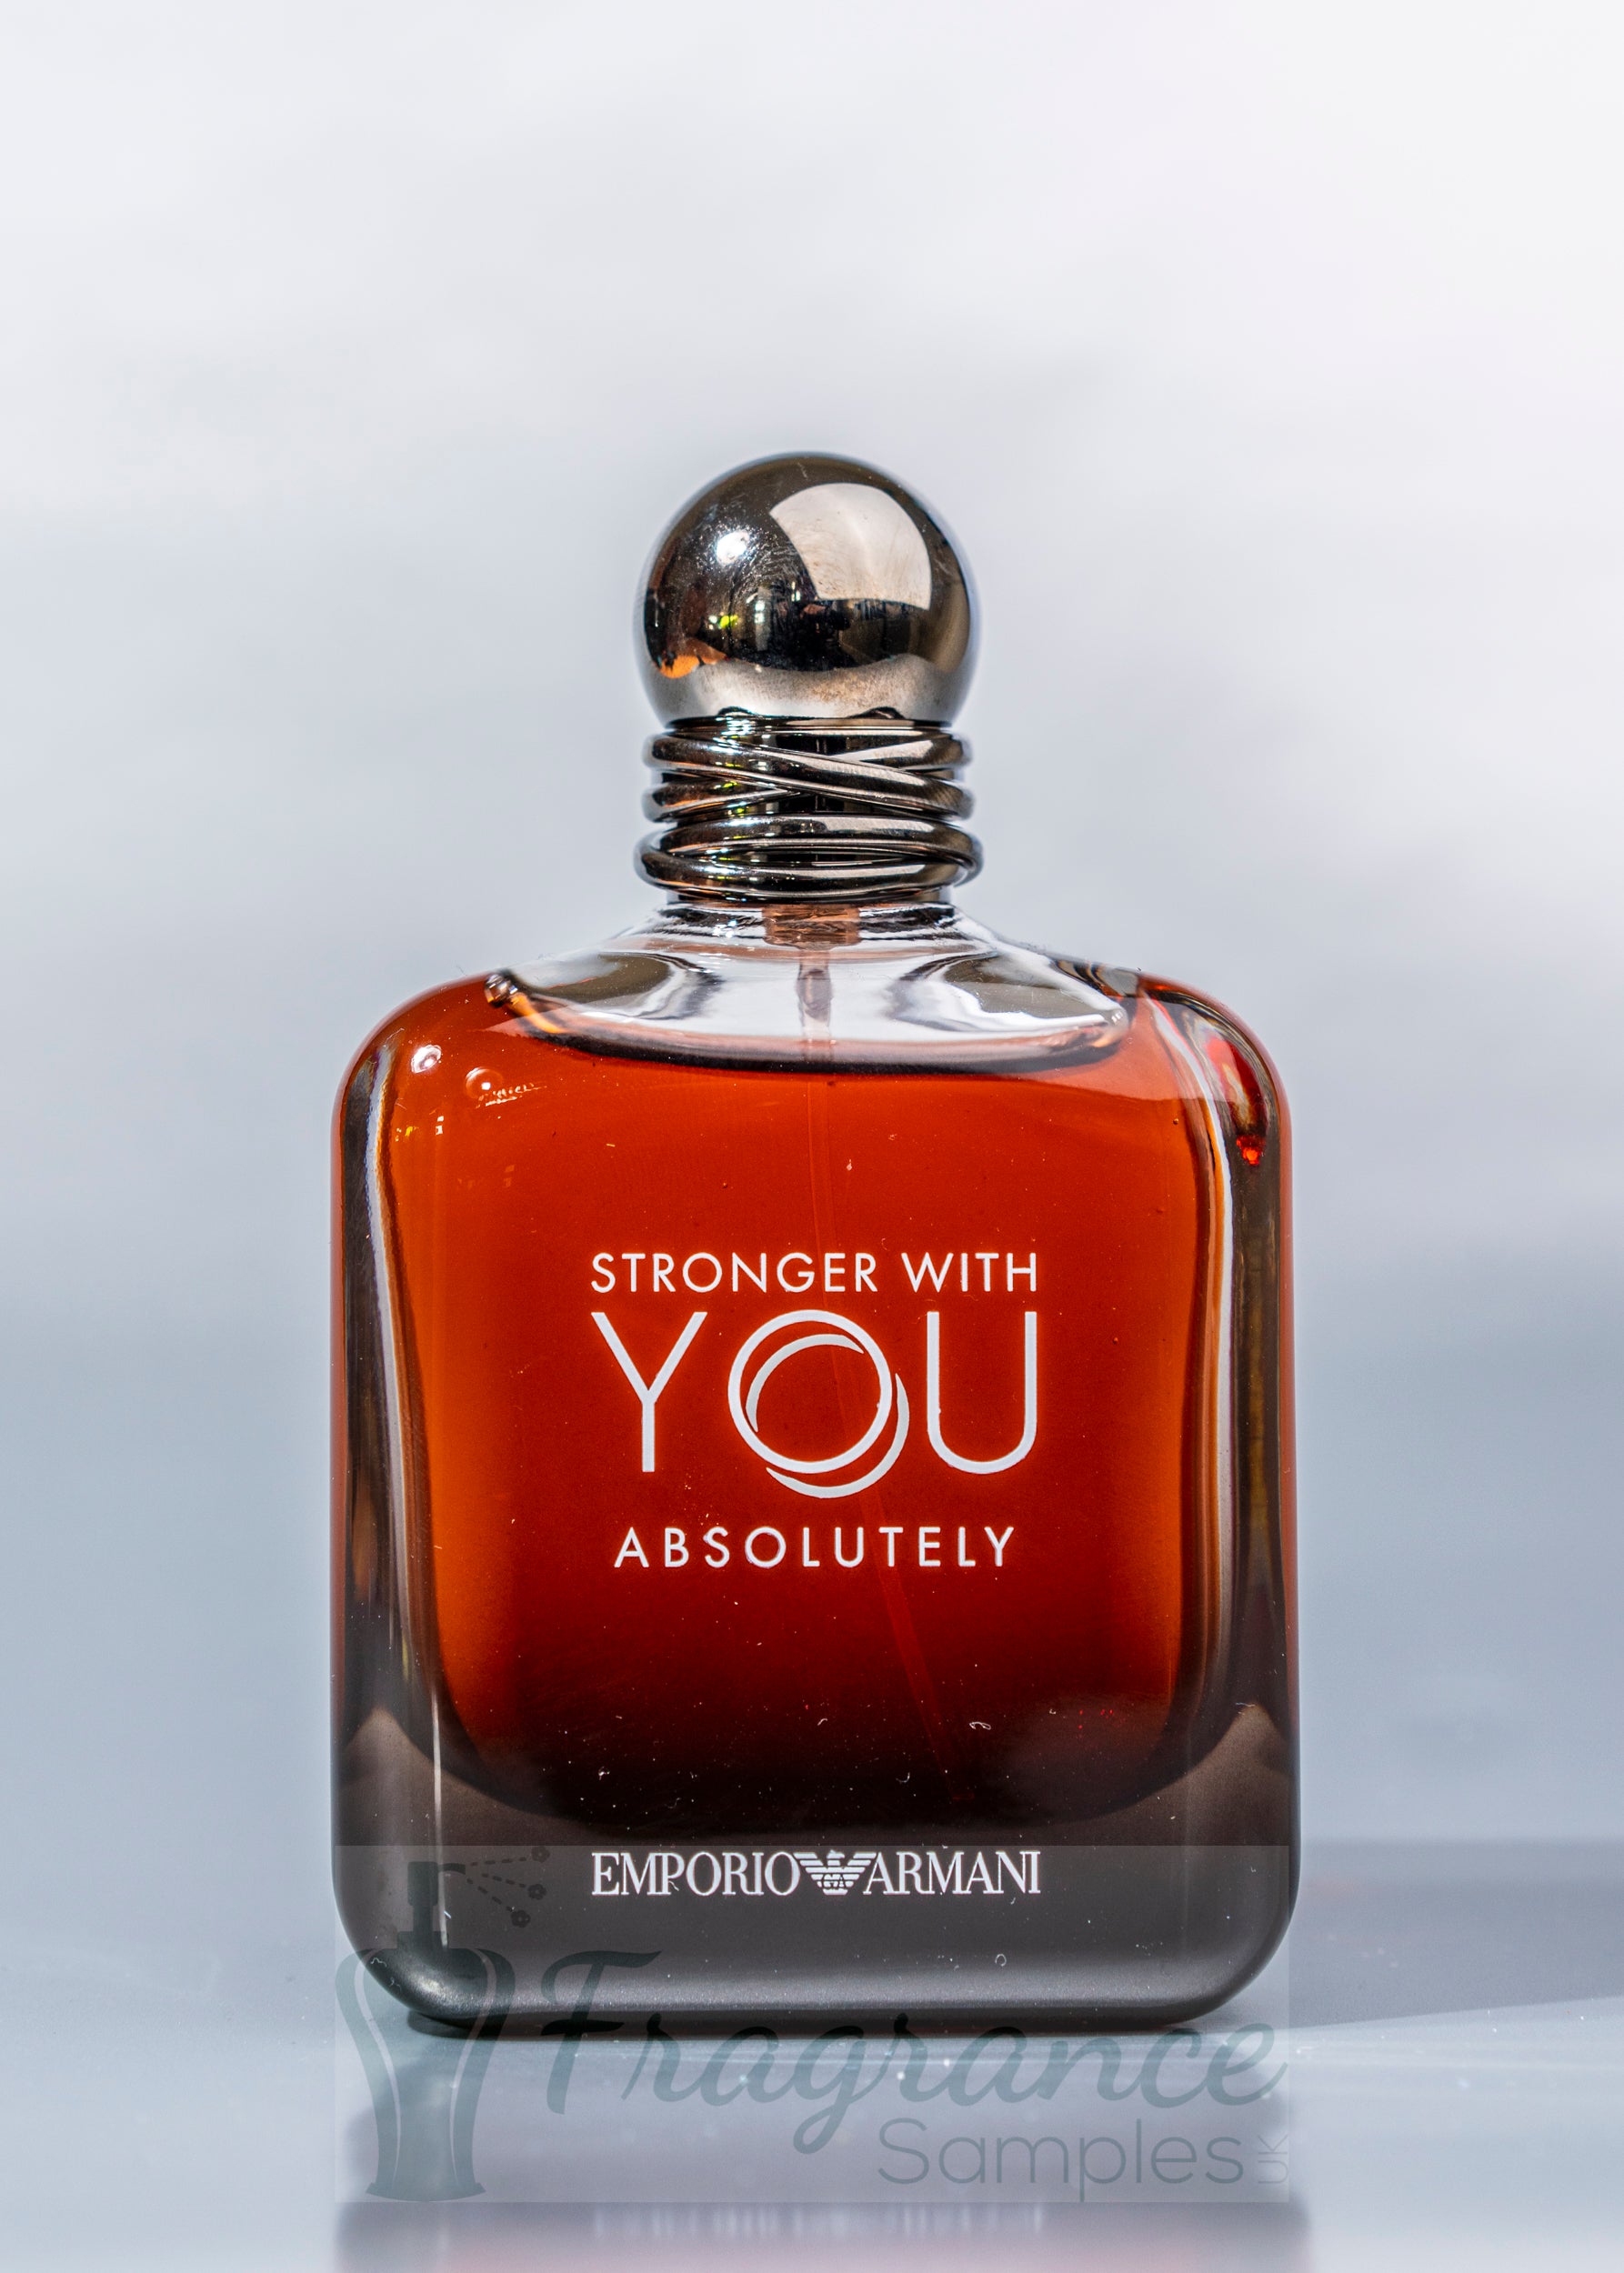 Emporio Armani Stronger with You Absolutely – Fragrance Samples UK